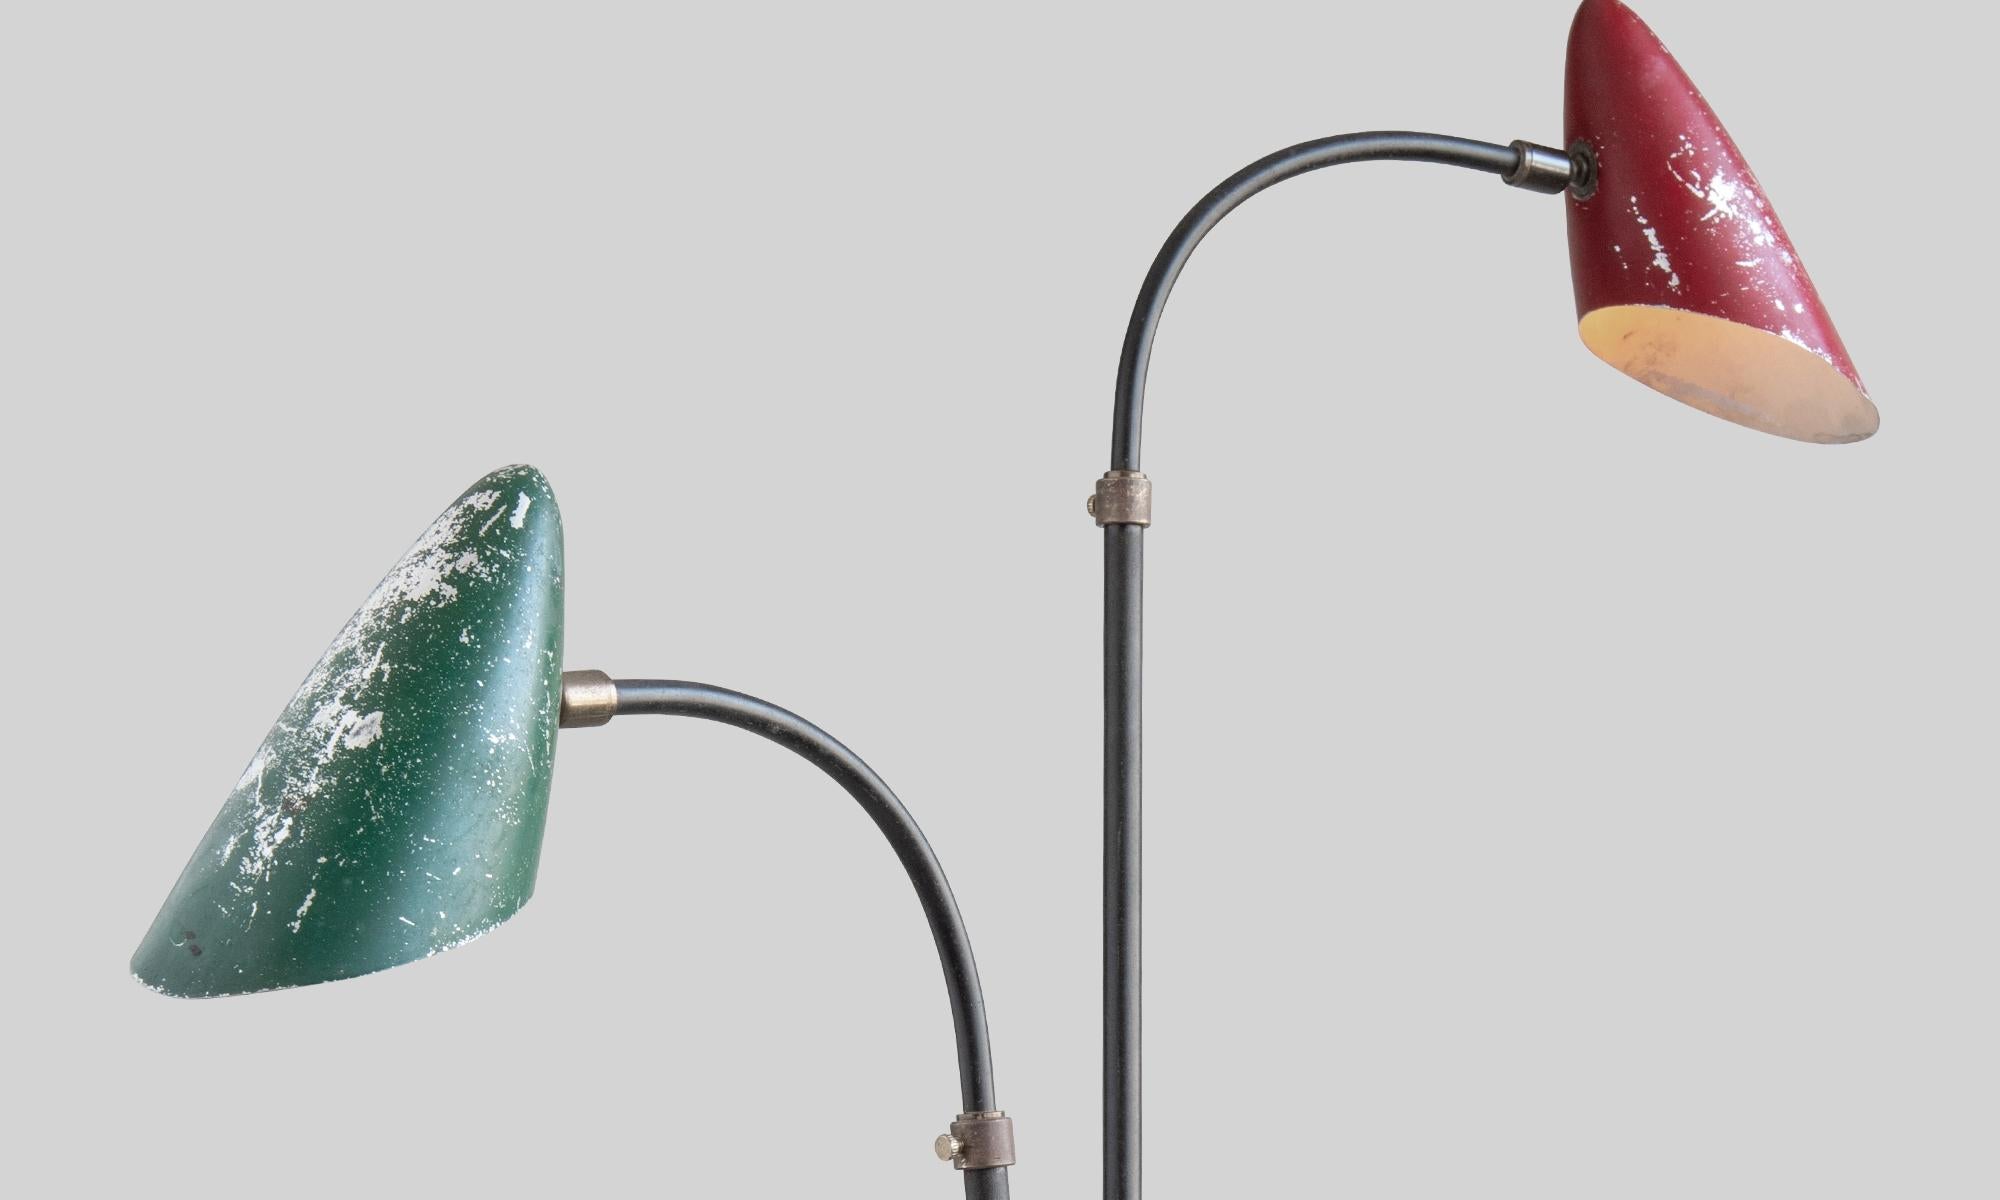 Curvy metal floor lamp with brass details, articulating arms, and painted metal shades.
France, circa 1960.